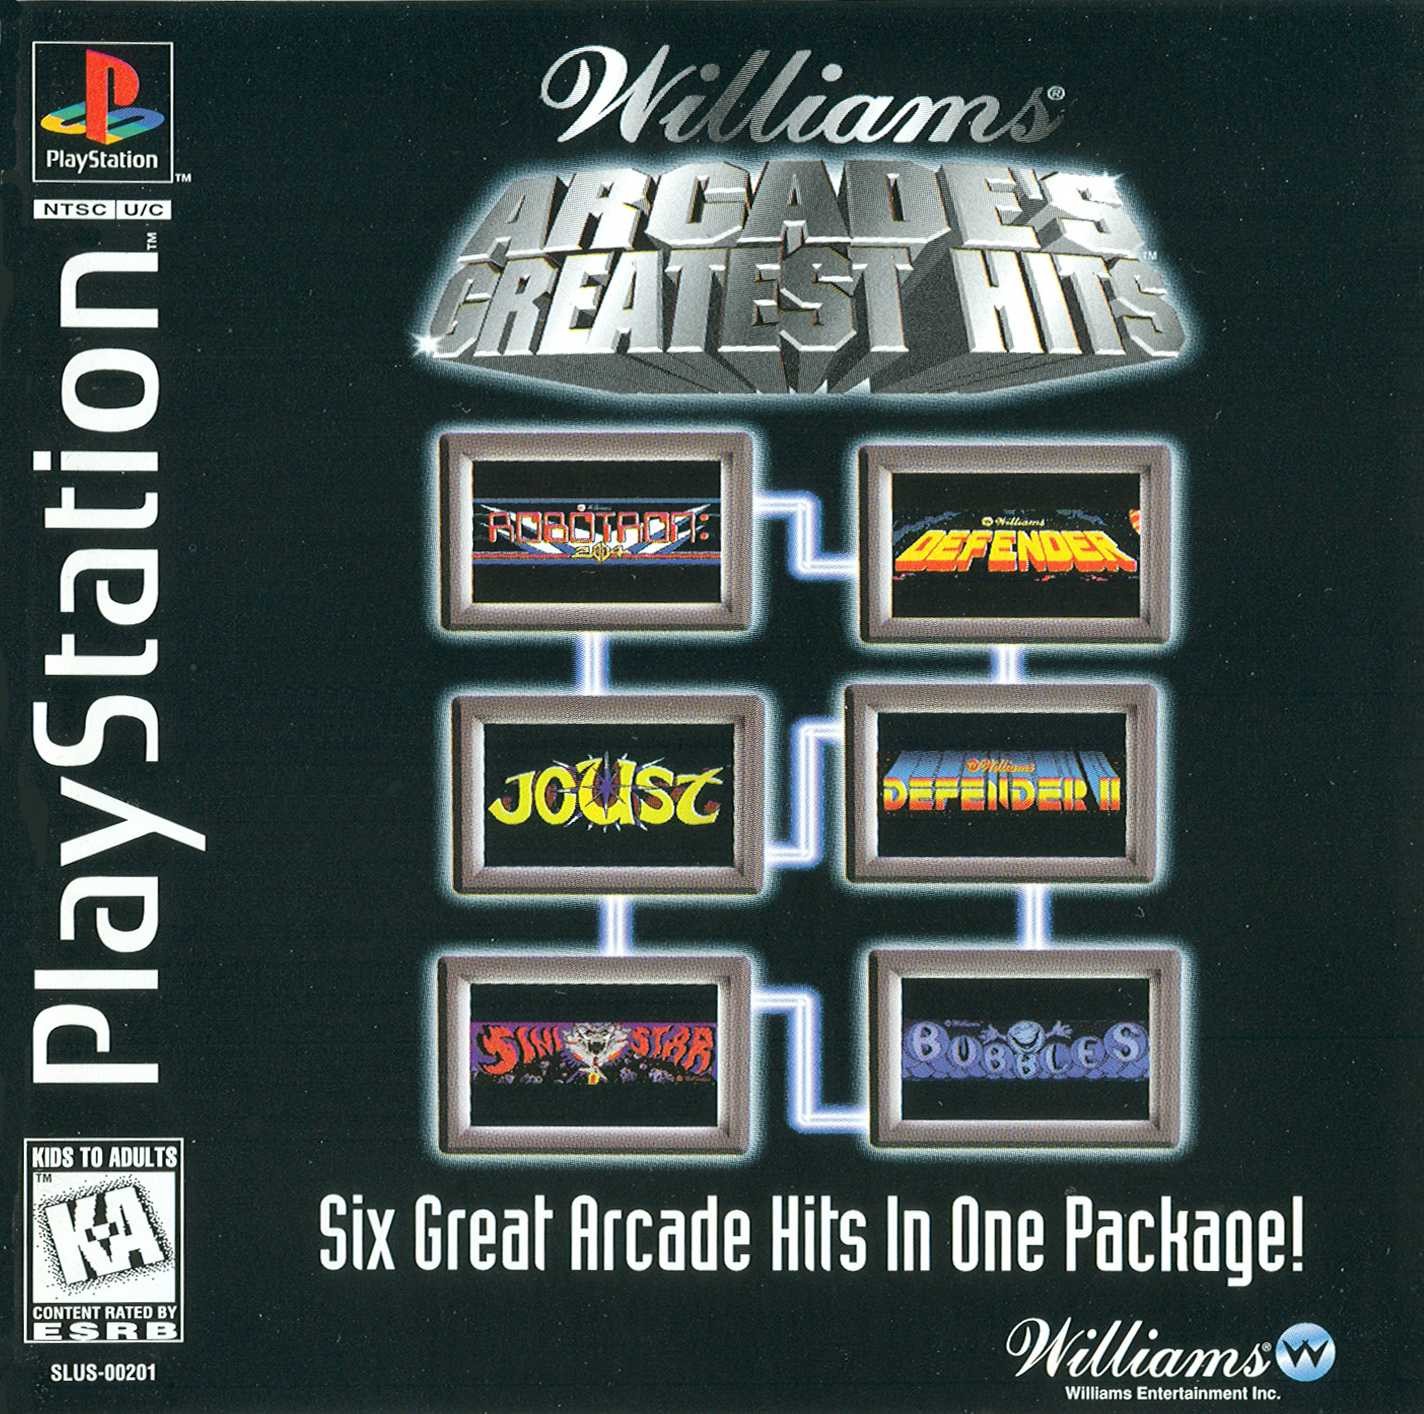 midway arcade greatest hits ps1